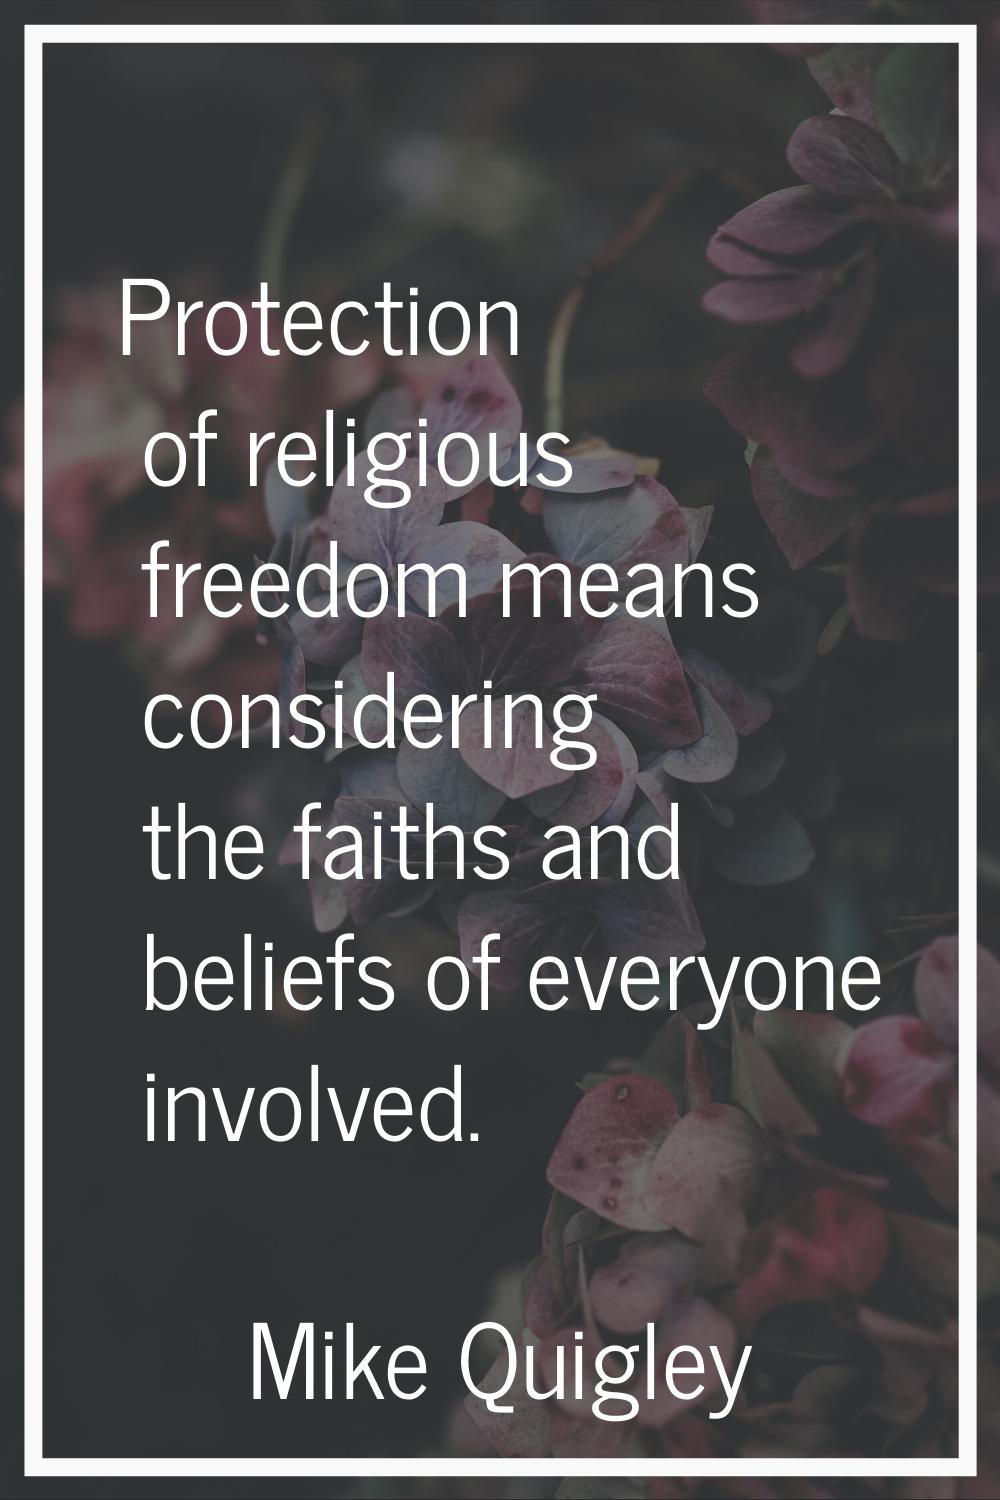 Protection of religious freedom means considering the faiths and beliefs of everyone involved.